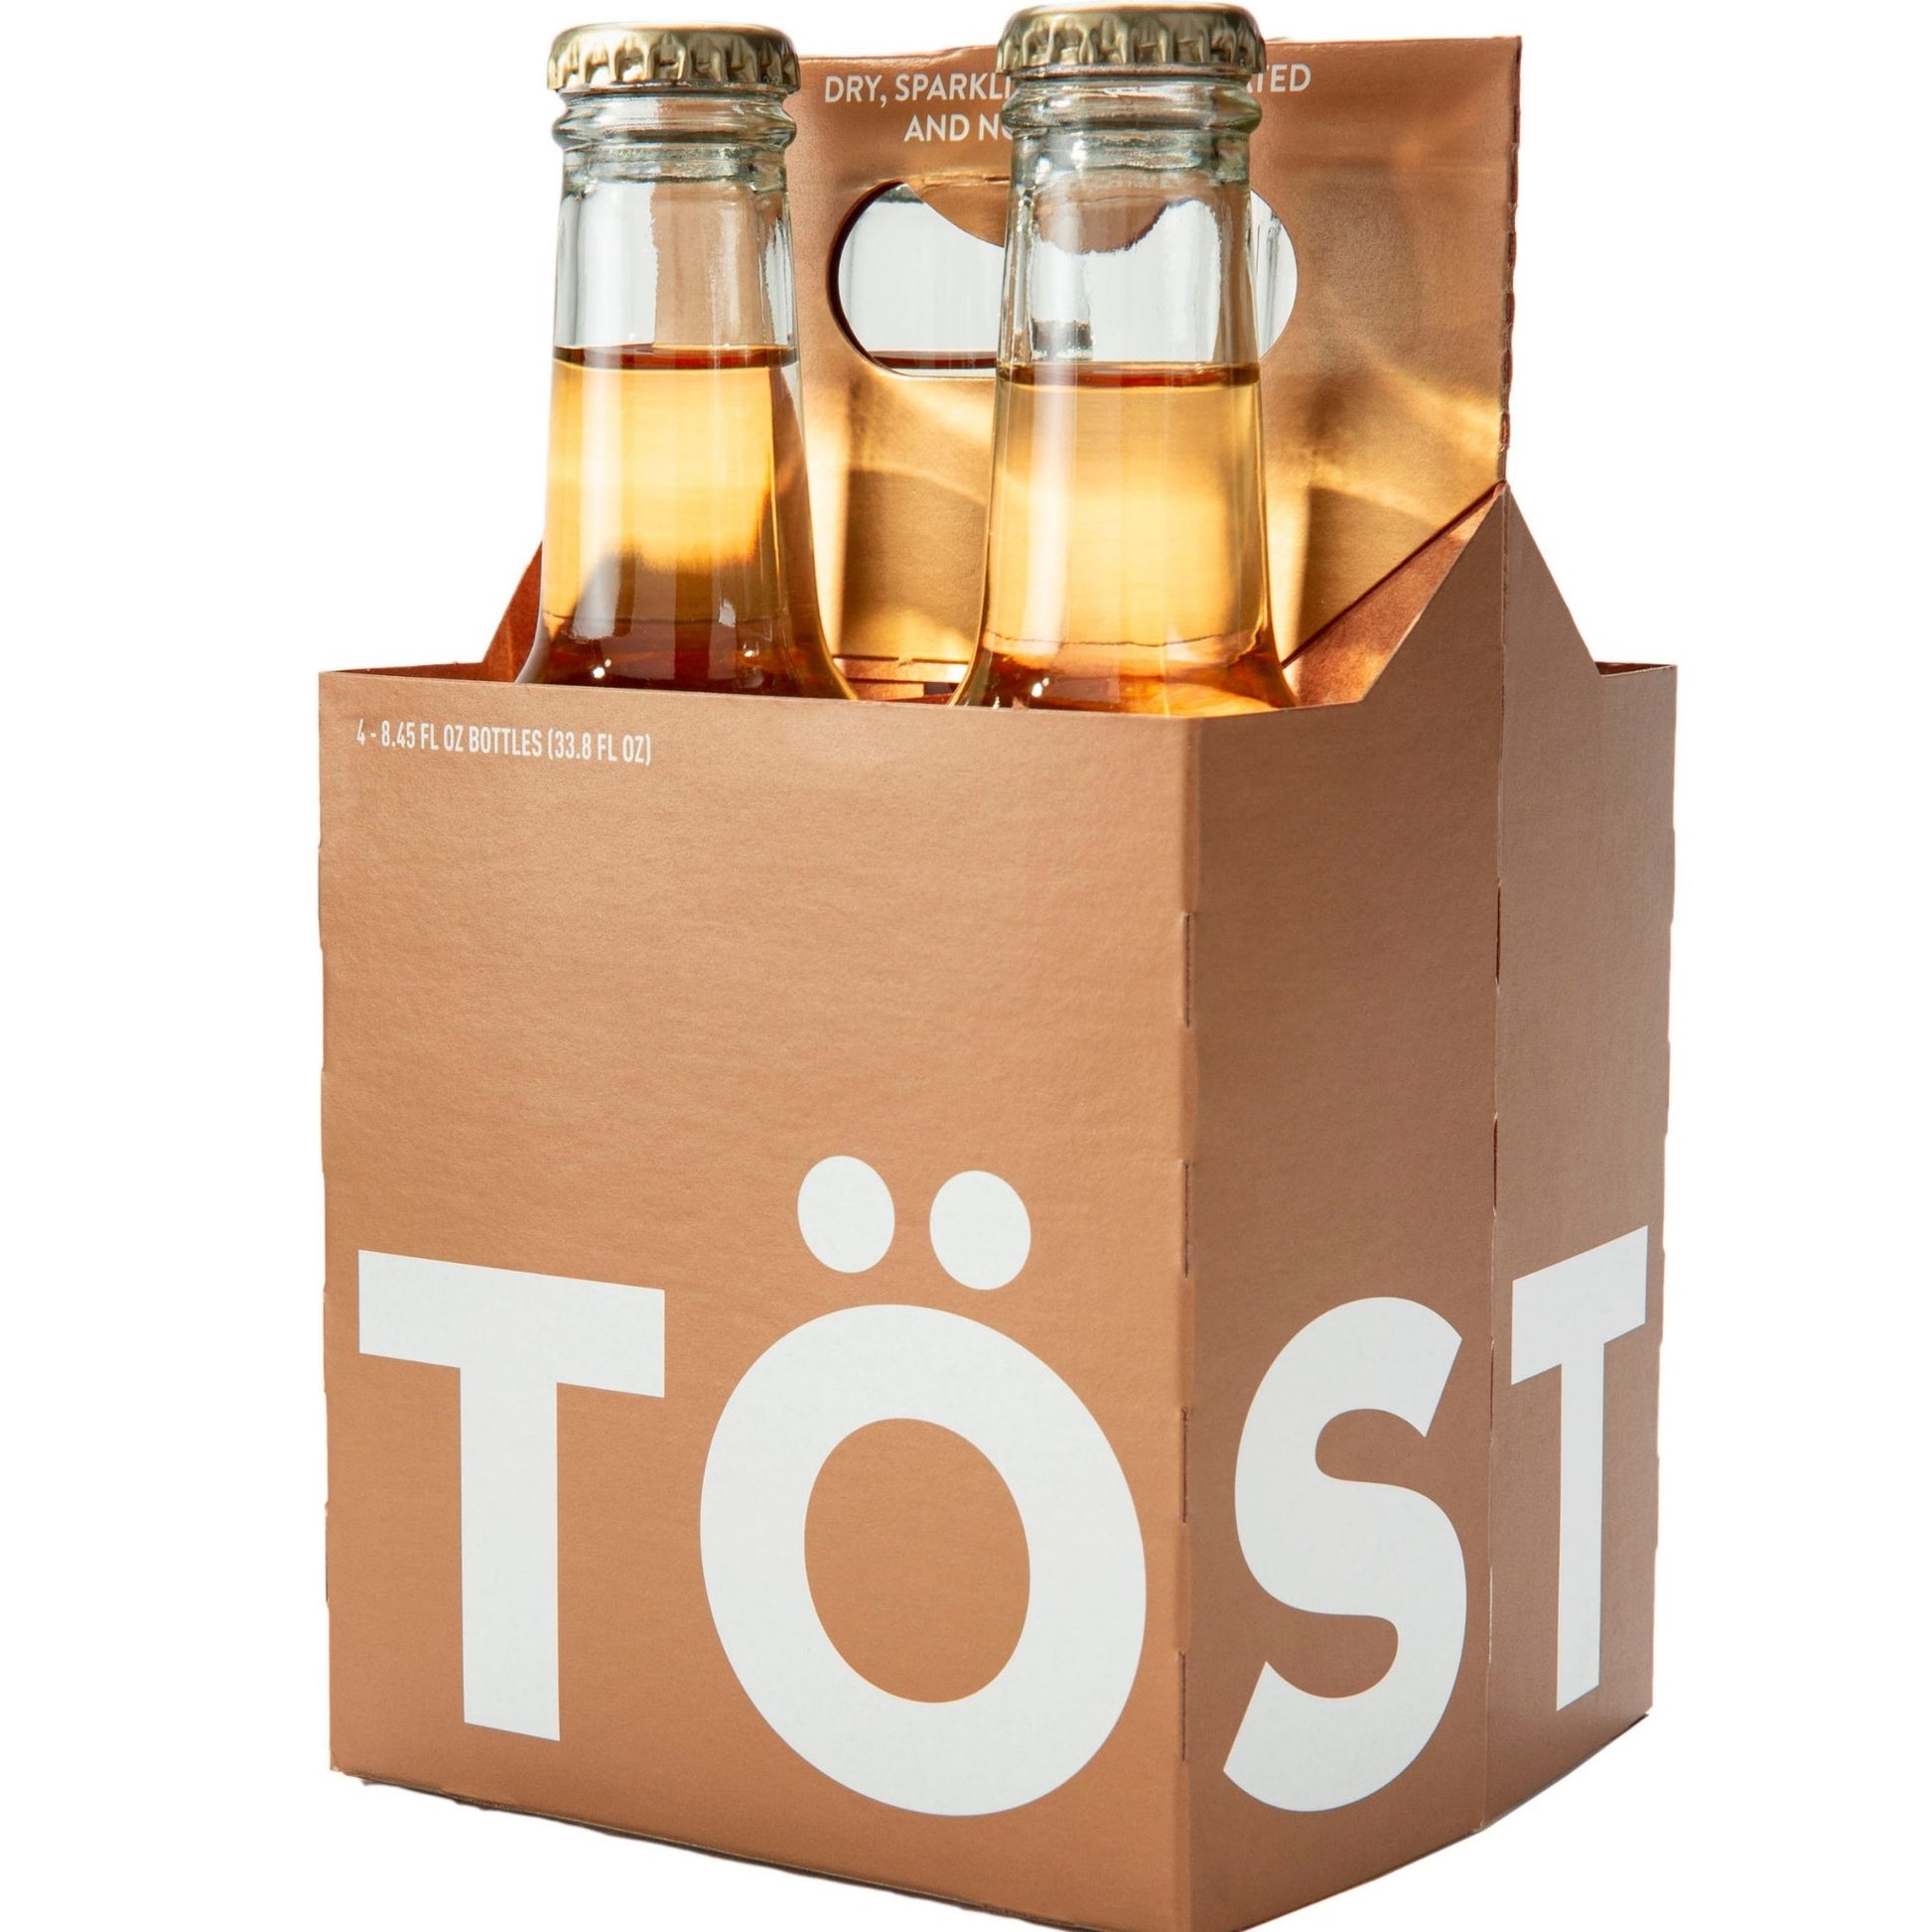 A photo of a pack of four Töst Sparkling White. Töst is available at knyota.com